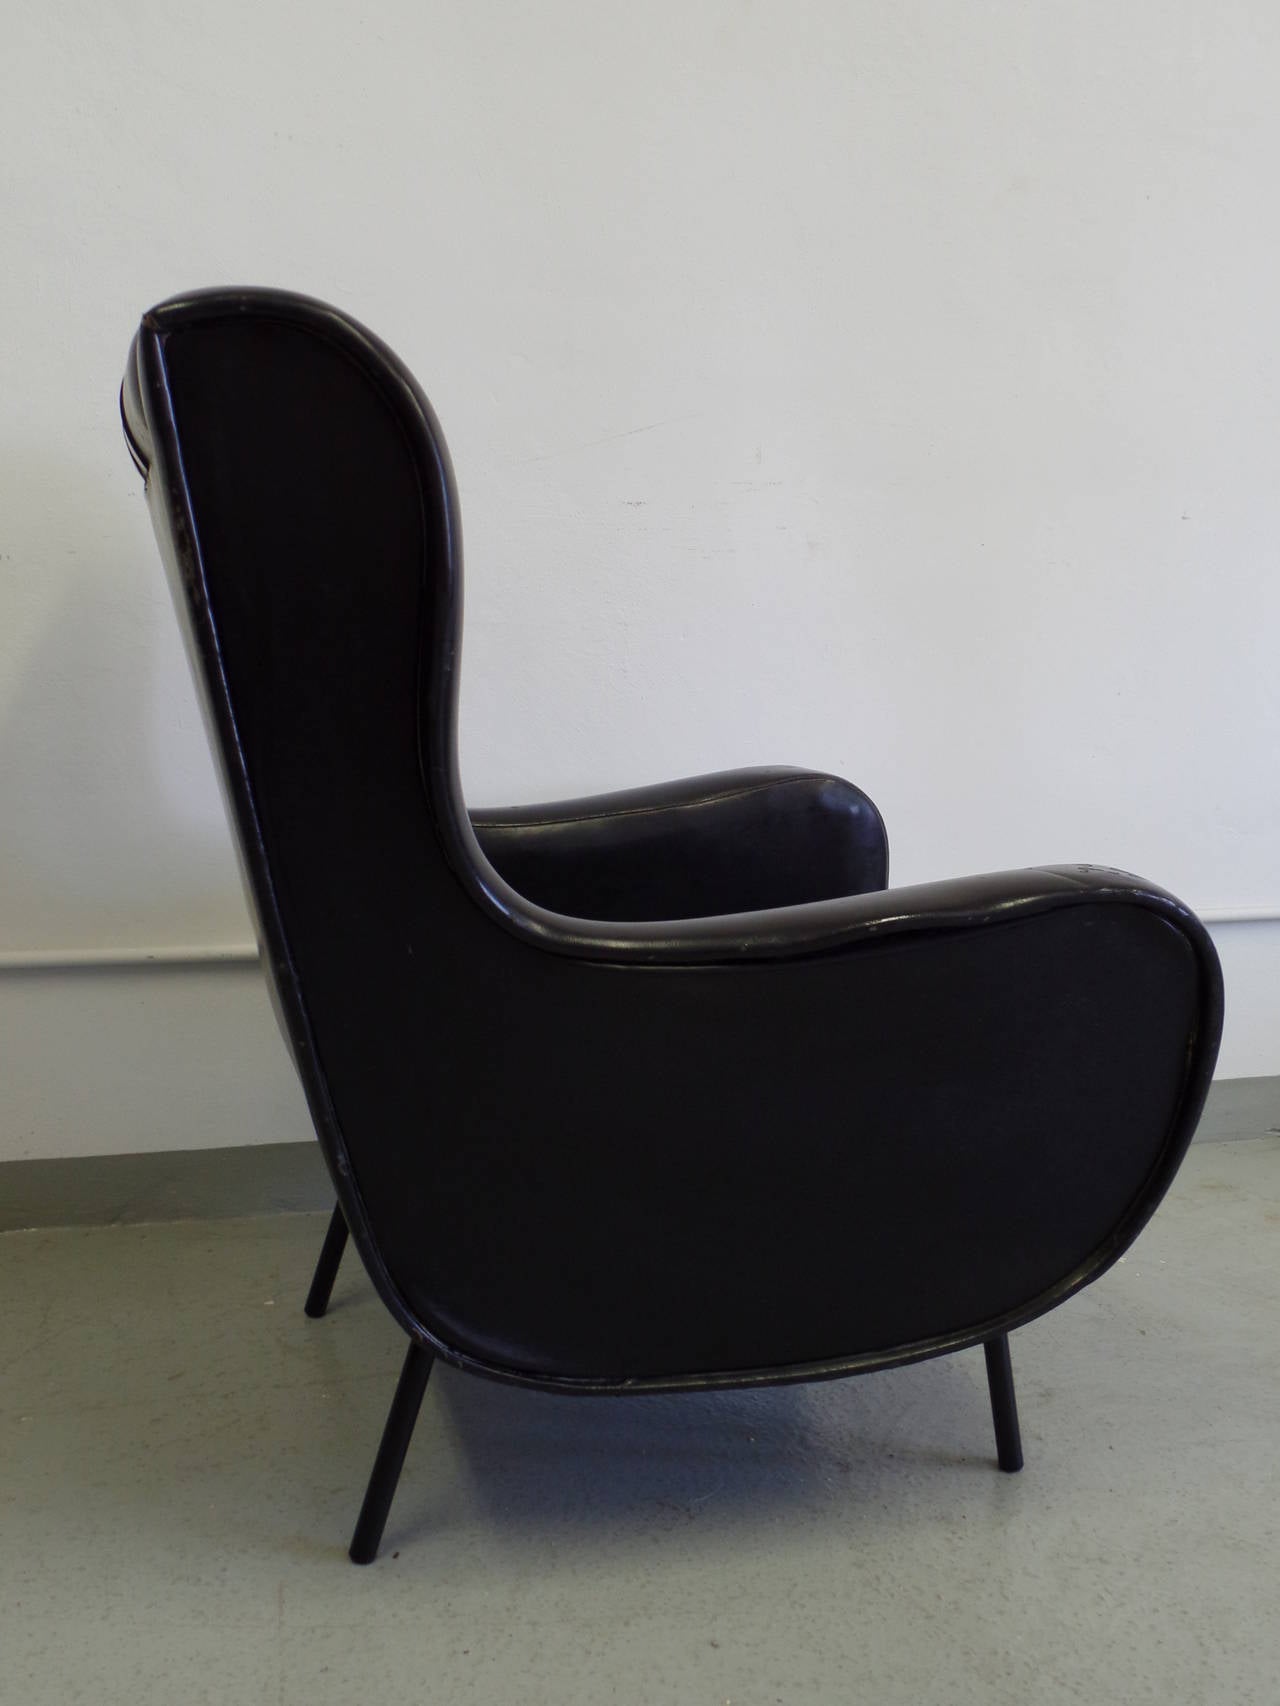 Elegant Pair of Italian 1950's Design Wingback Armchairs in the Style of Marco Zanuso's Senior Chairs Designed for Arflex. These mid-century chairs are large and comfortable, and are perfect organic modern forms to re-upholster to client taste.